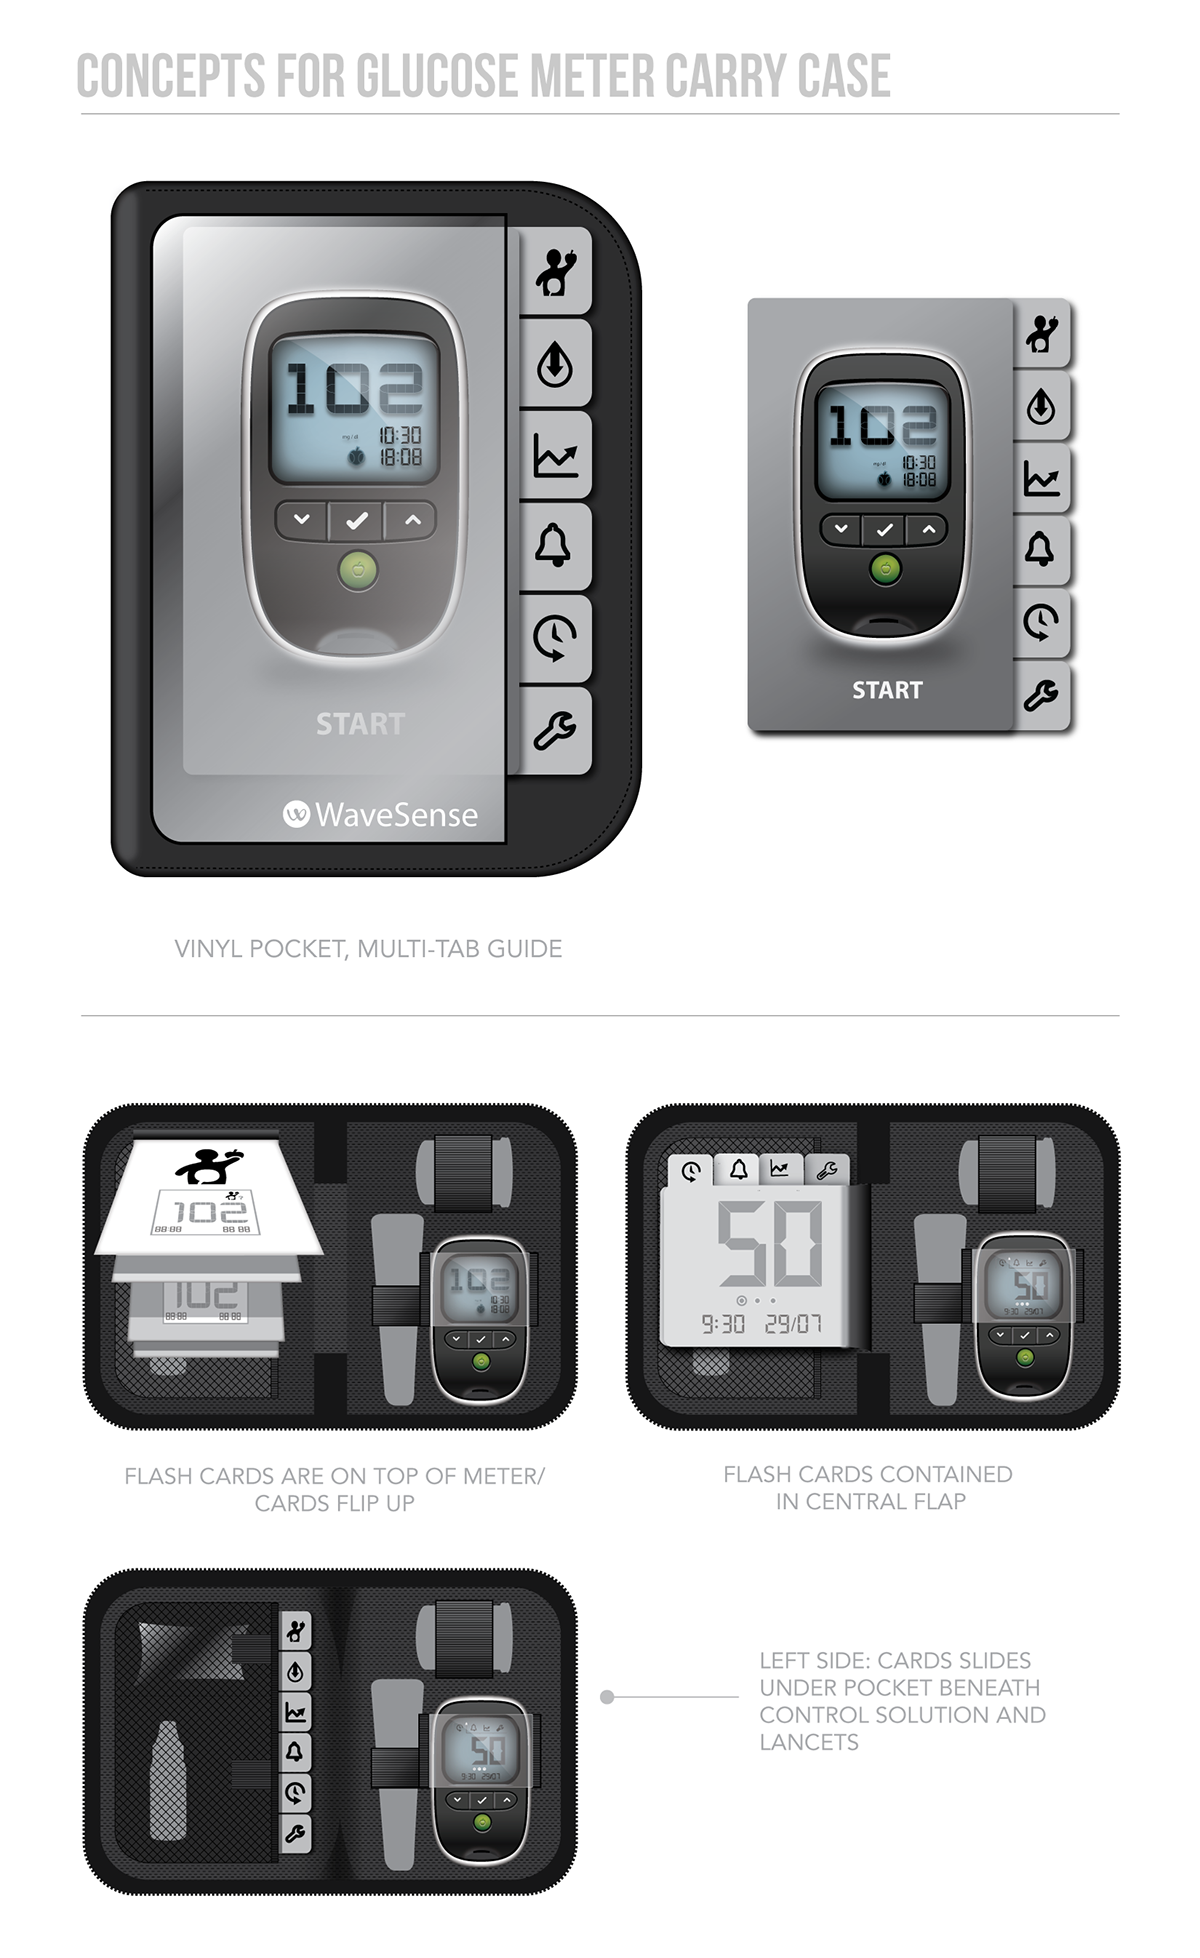 blood glucose meter glucose meter medical device healthcare diabetes product